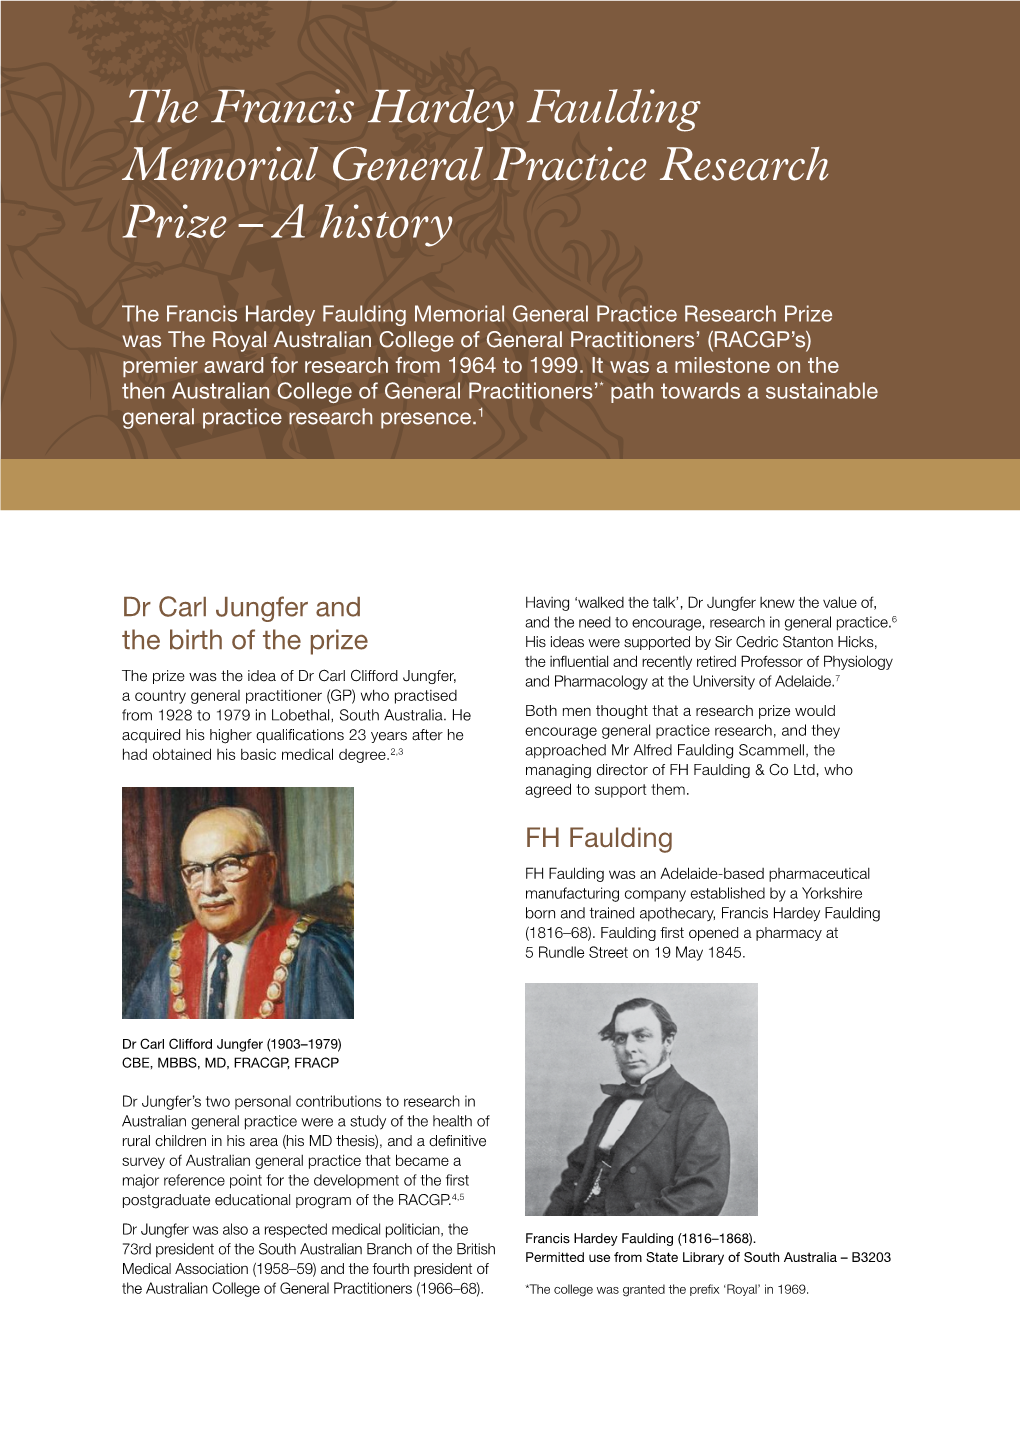 The Francis Hardey Faulding Memorial General Practice Research Prize – a History